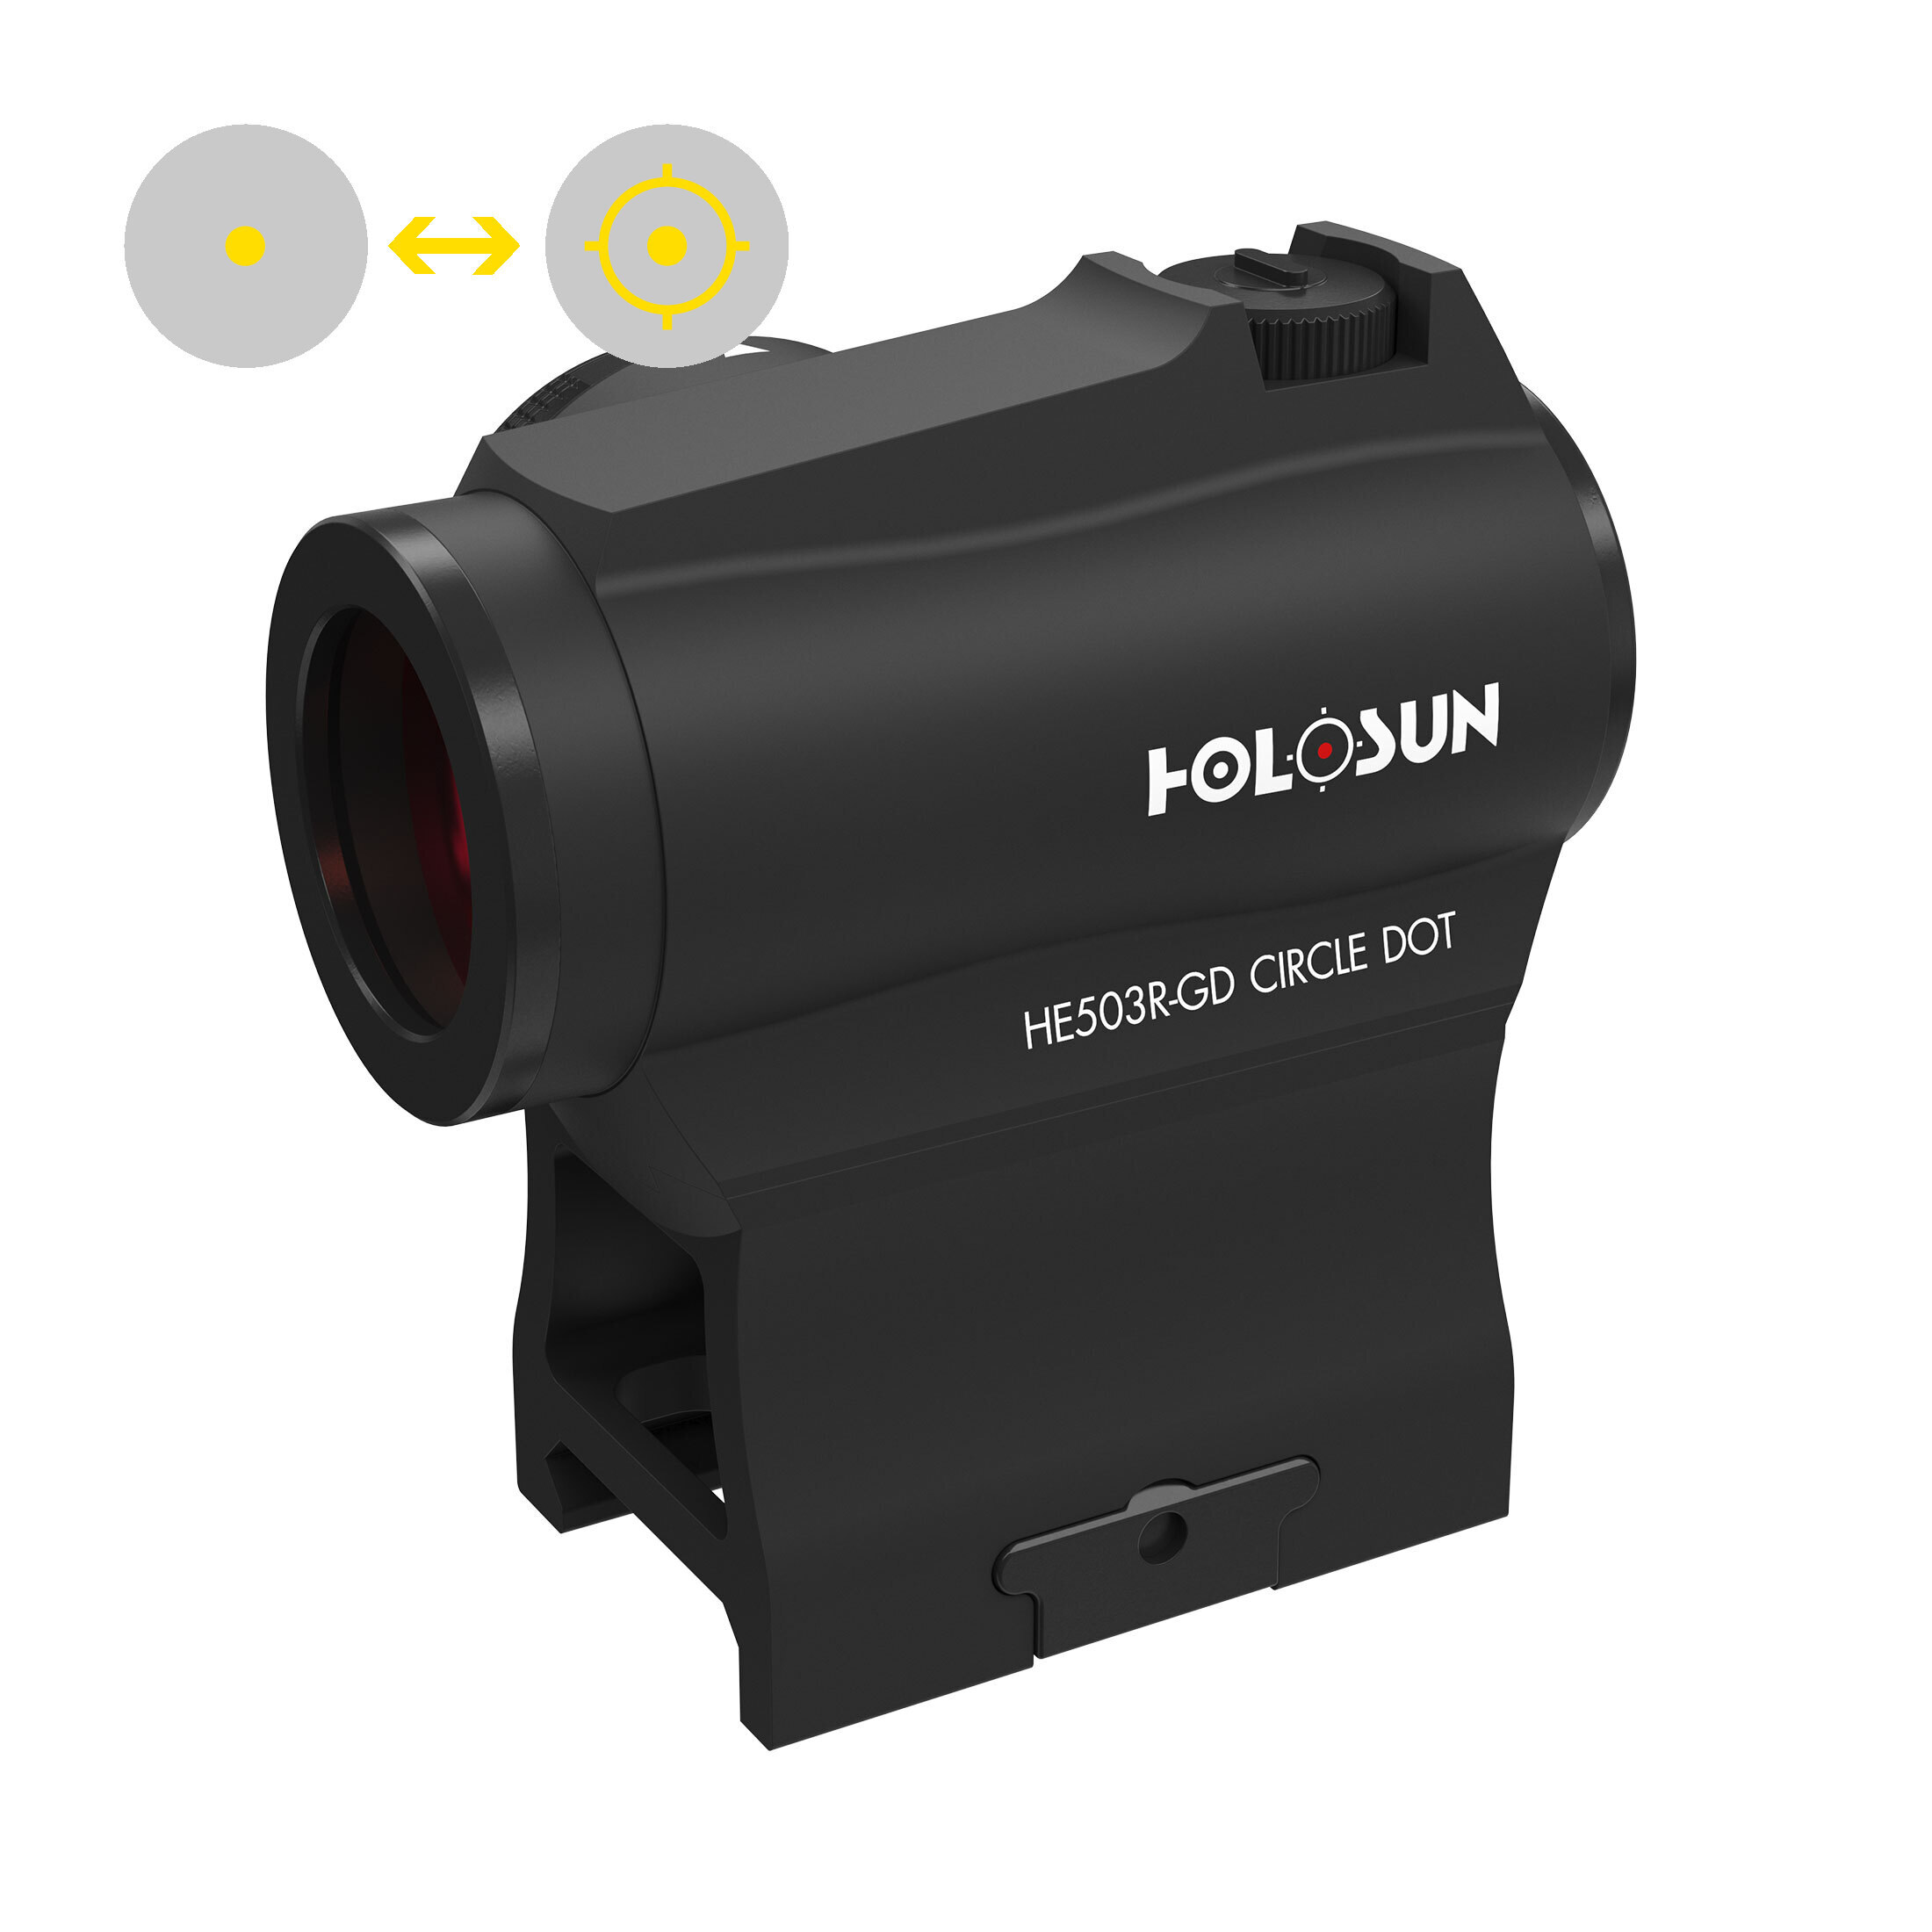 Holosun ELITE HE503R-GD Microdot gold dot sight with 2MOA dot / 65MOA ring reticle, new rheostat di…